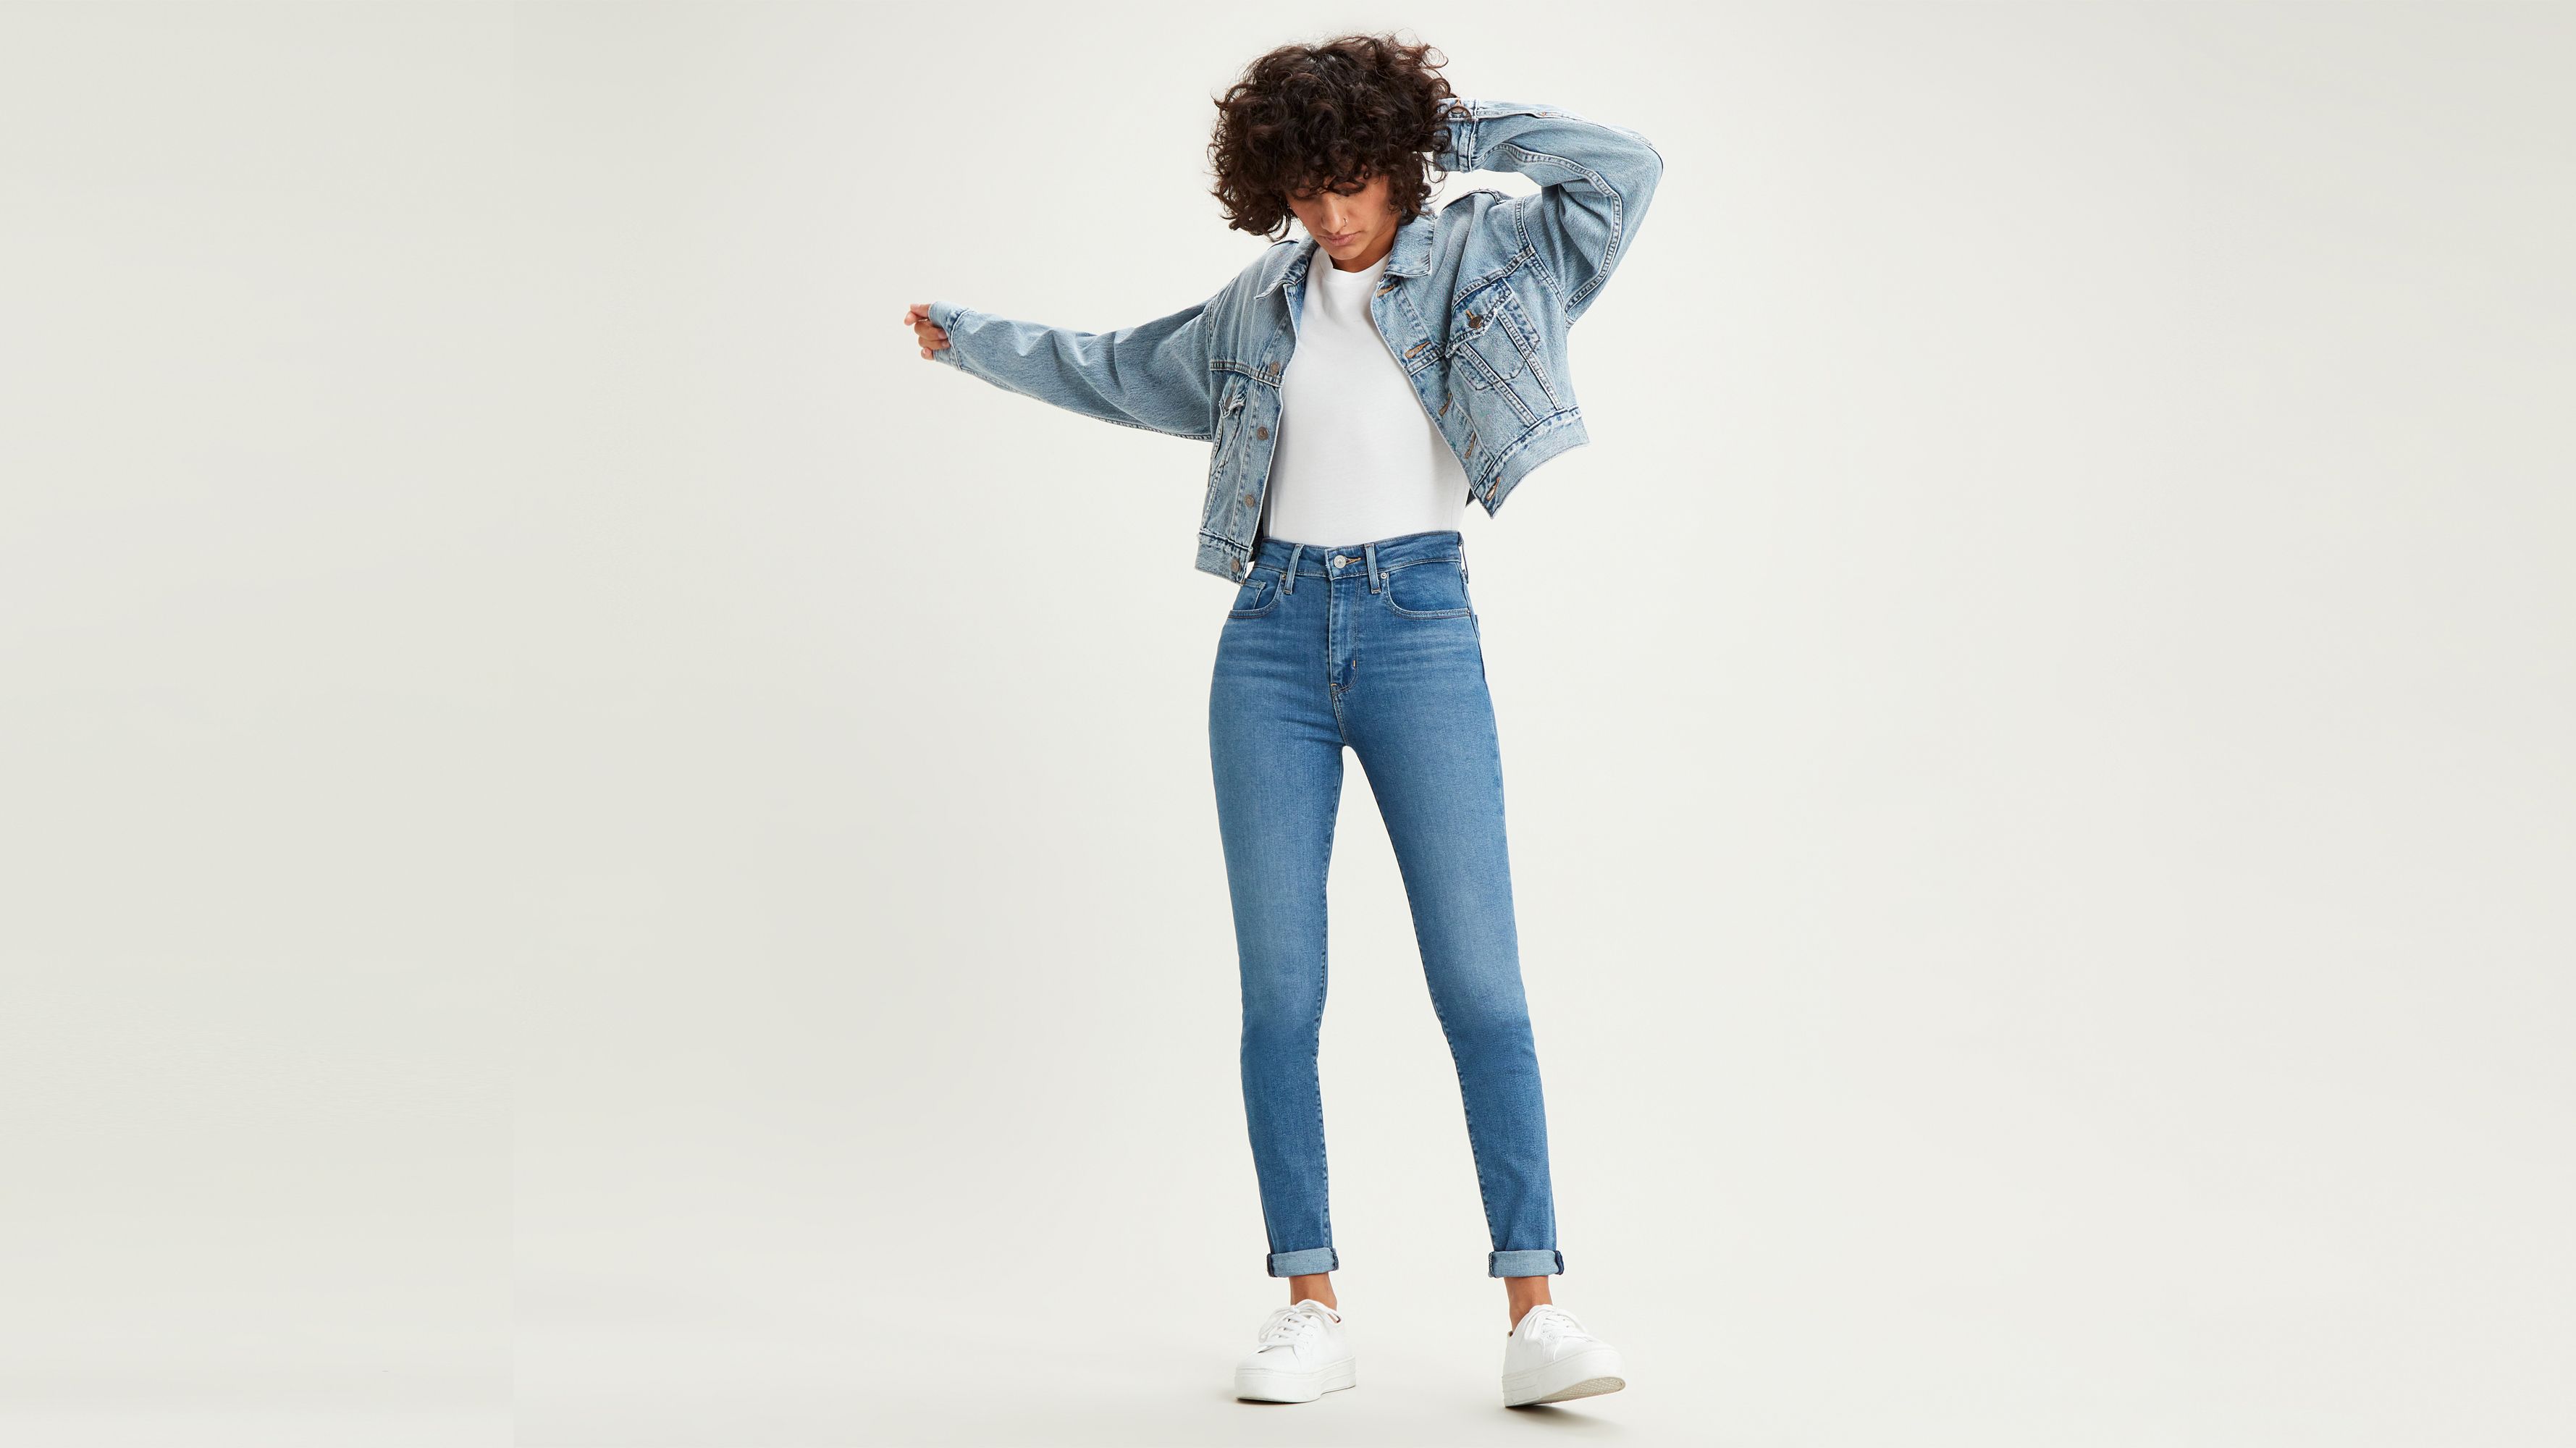 721 high rise skinny jeans levis